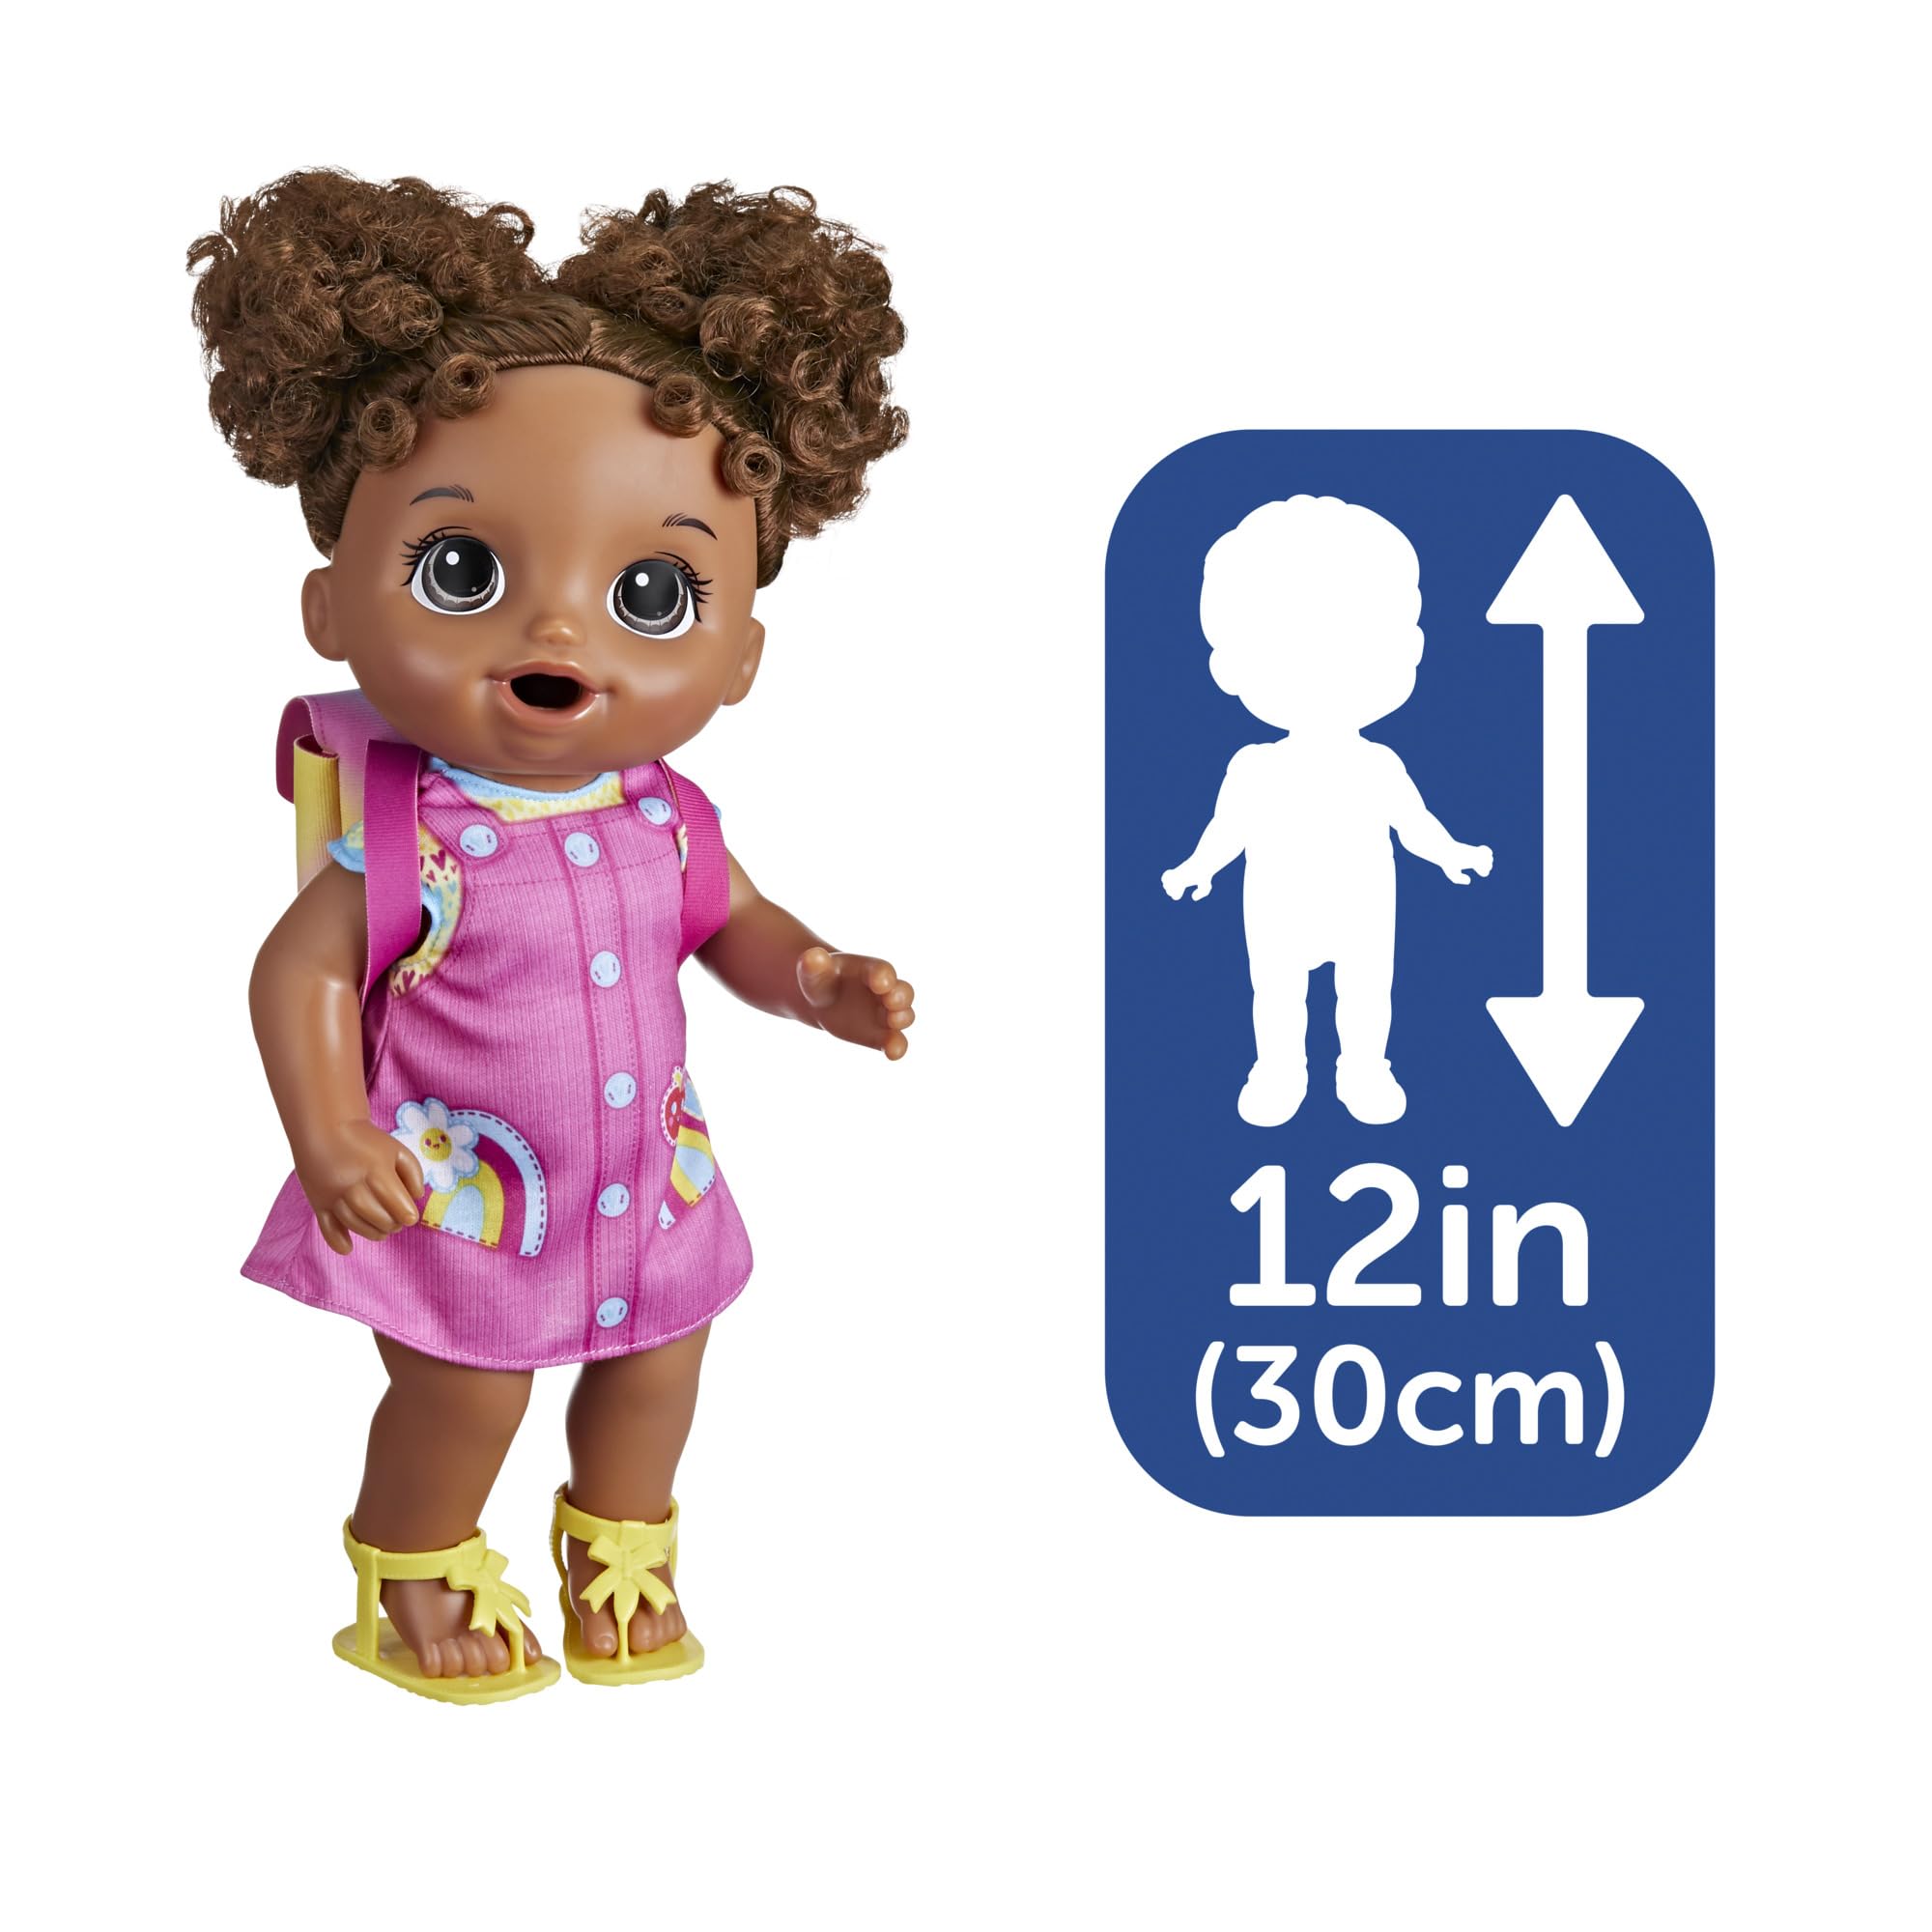 Baby Alive Time for School Baby Doll Set, Back to School Toys for 3 Year Old Girls & Boys & Up, 12 Inch Baby Doll, Black Hair (Amazon Exclusive)